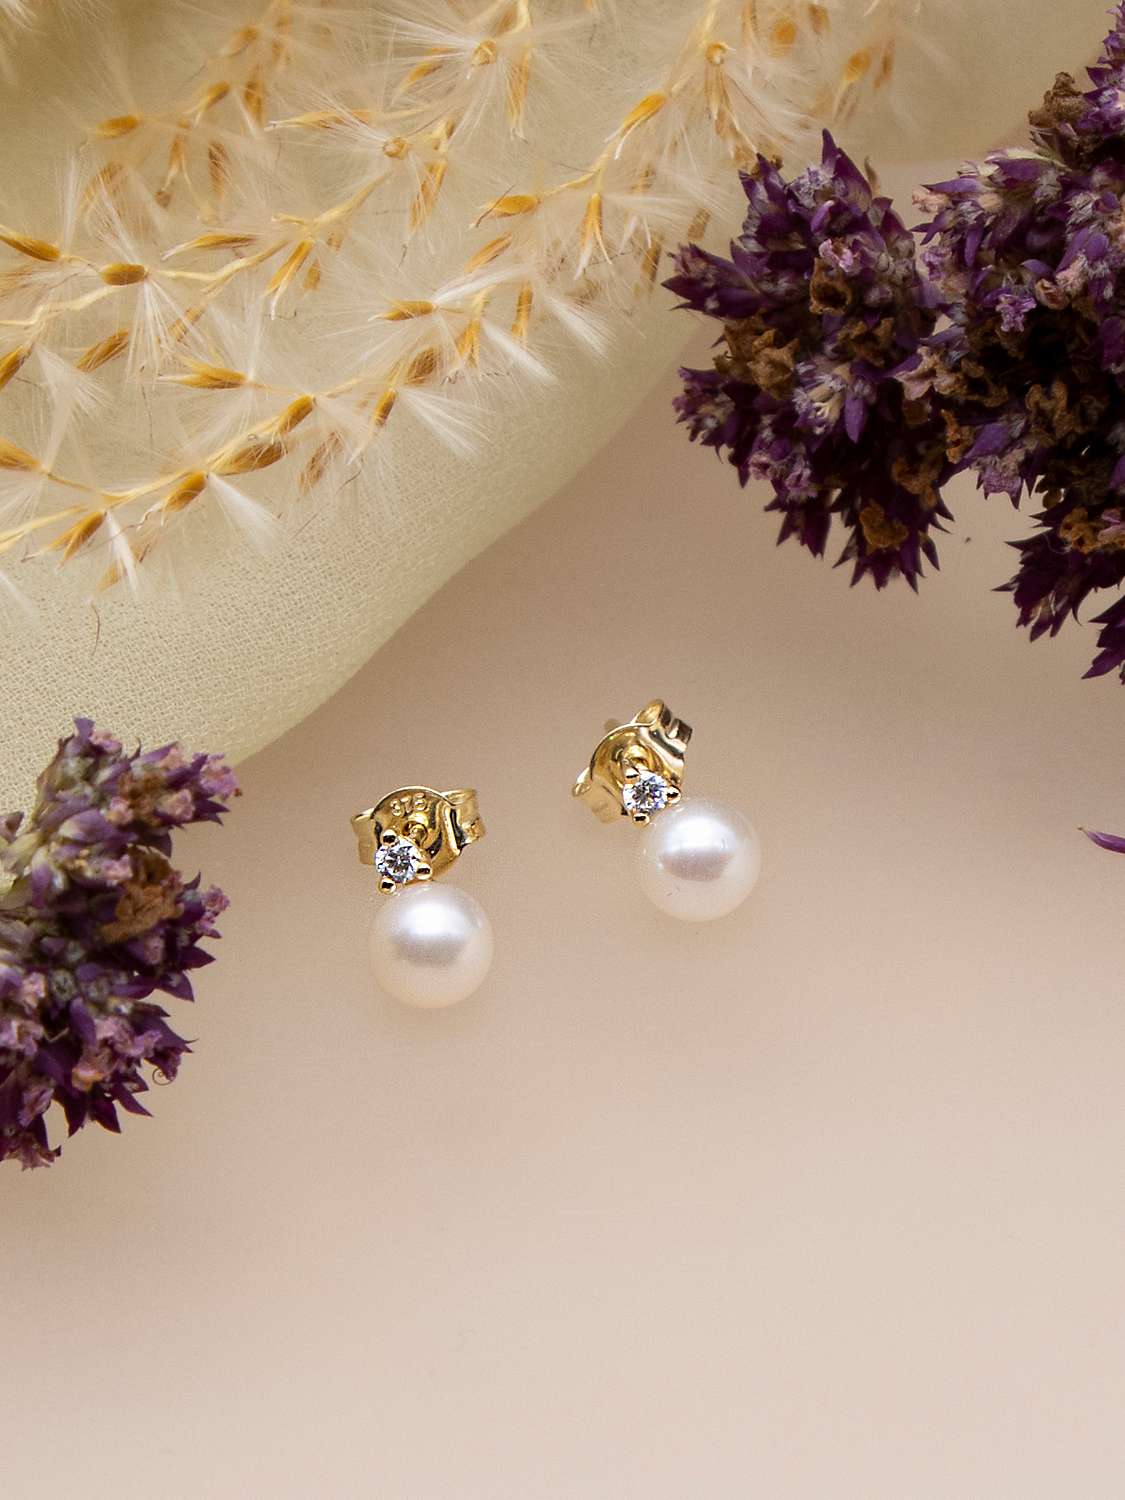 Buy IBB 9ct Gold Pearl & Cubic Zirconia Stud Earrings, Gold Online at johnlewis.com